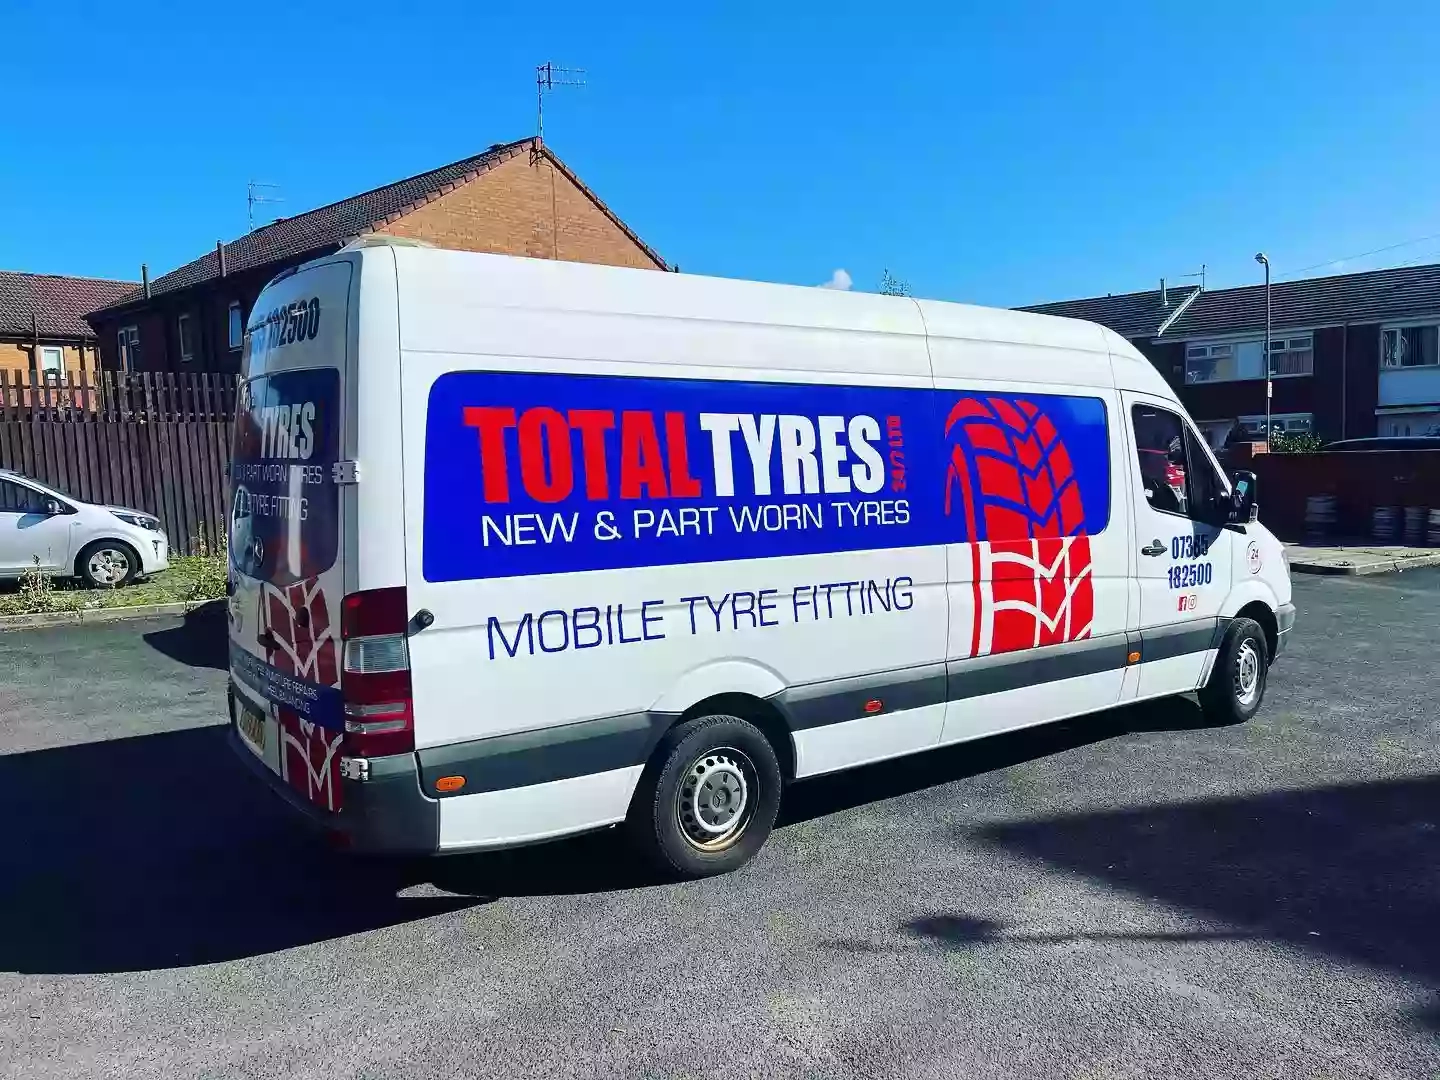 Total Tyres 24/7 Ltd mobile tyre fitting service